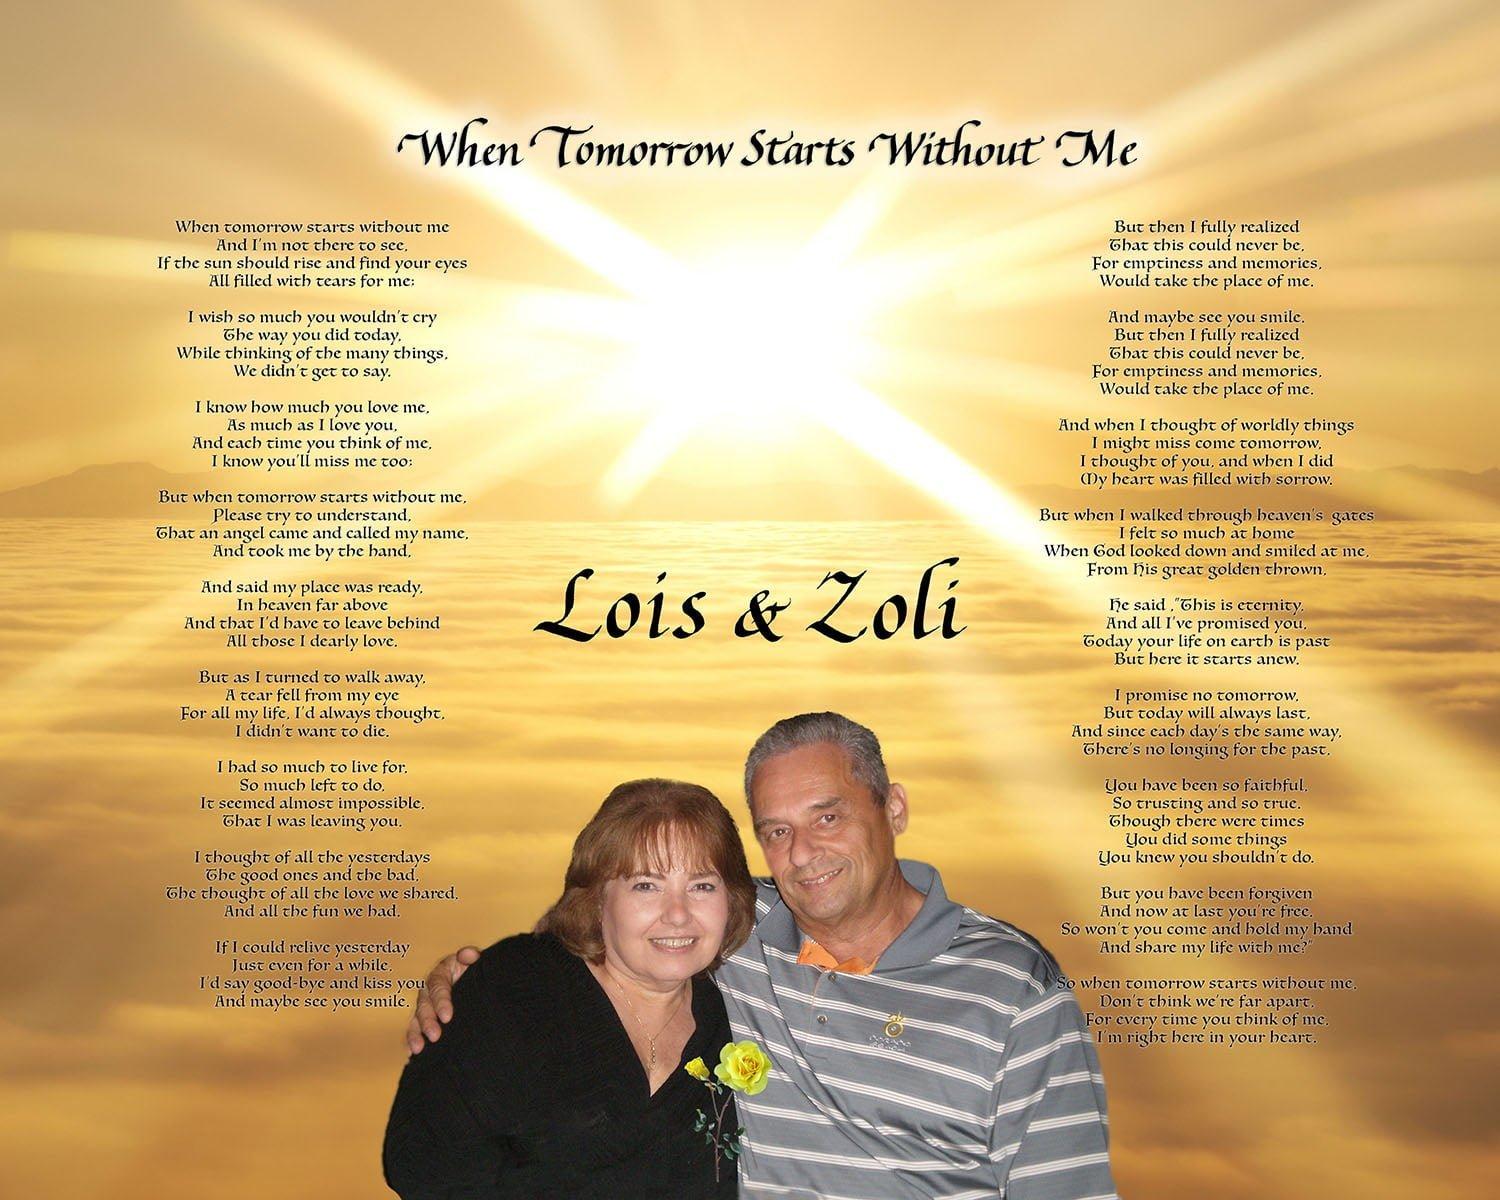 Memorial - complete poem"when tomorrow comes without me" personalized with calligraphy and photo of the couple